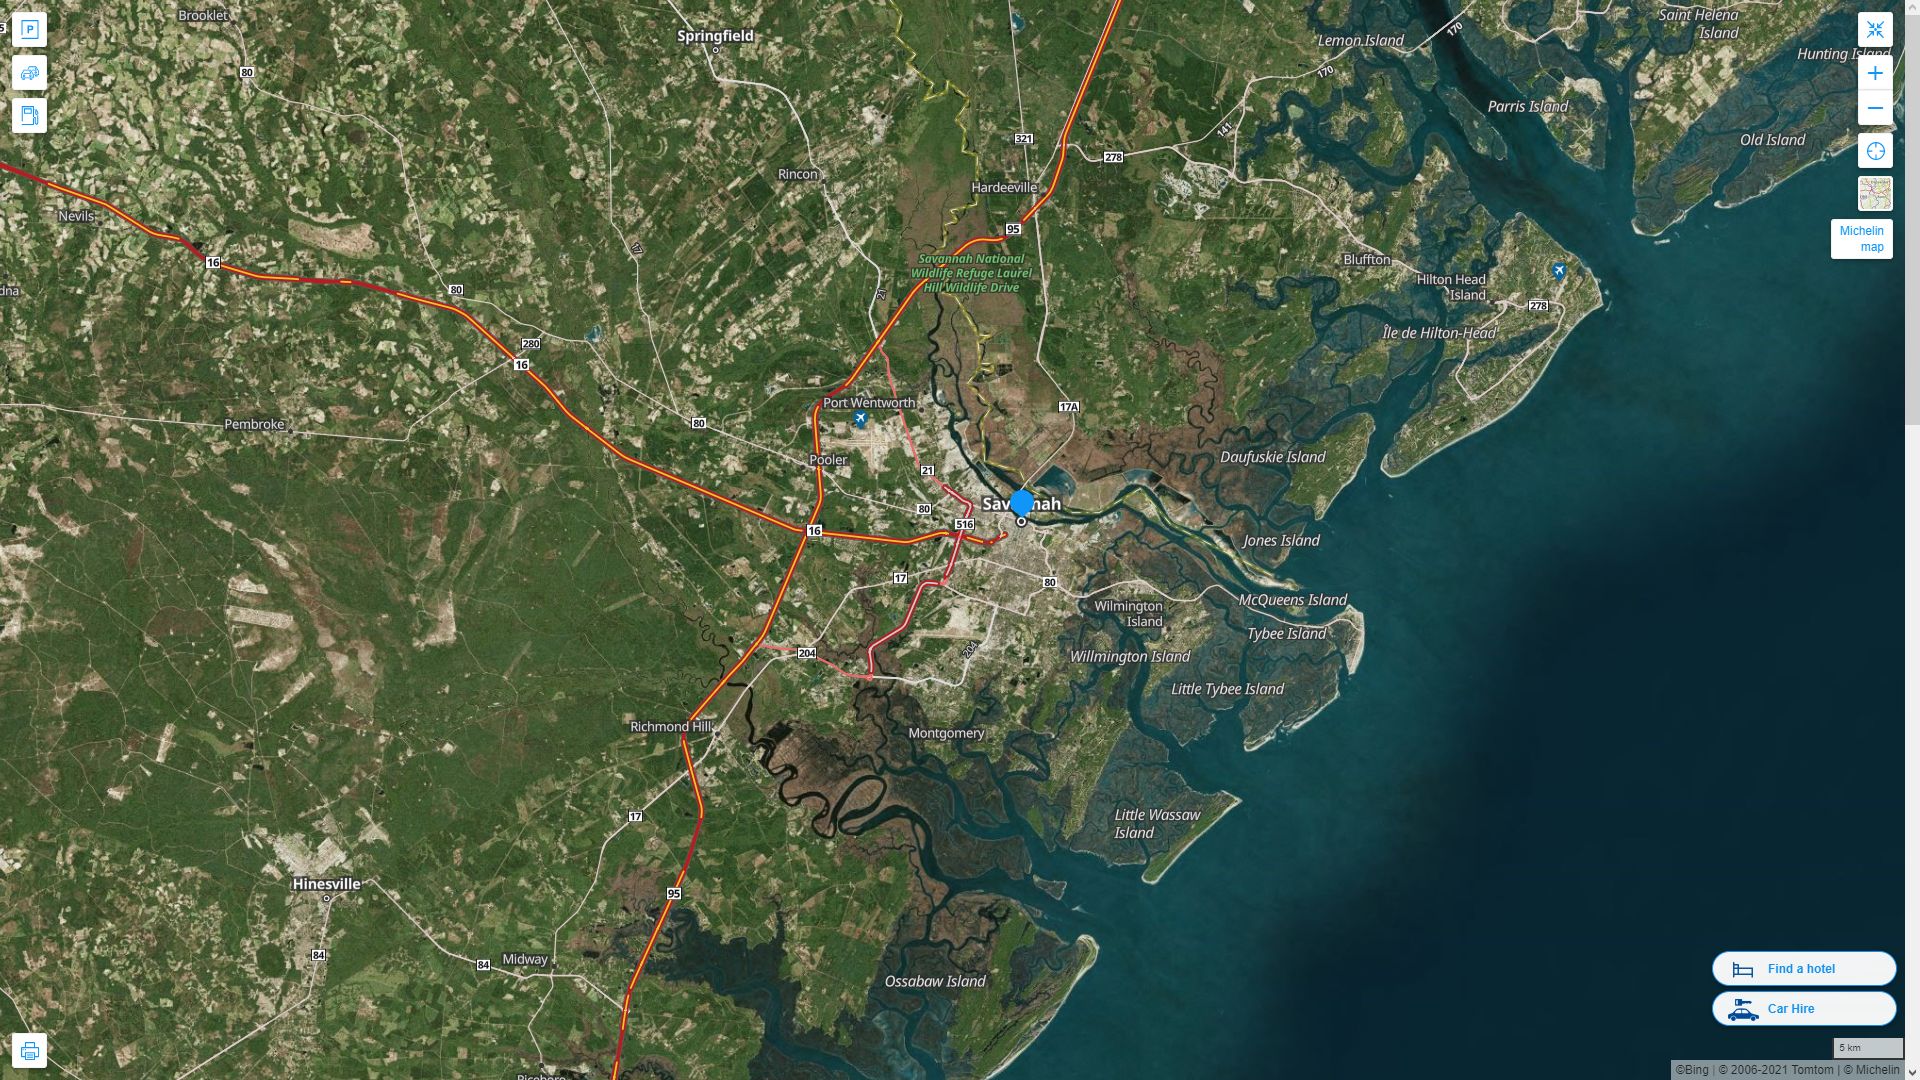 Savannah Georgia Highway and Road Map with Satellite View